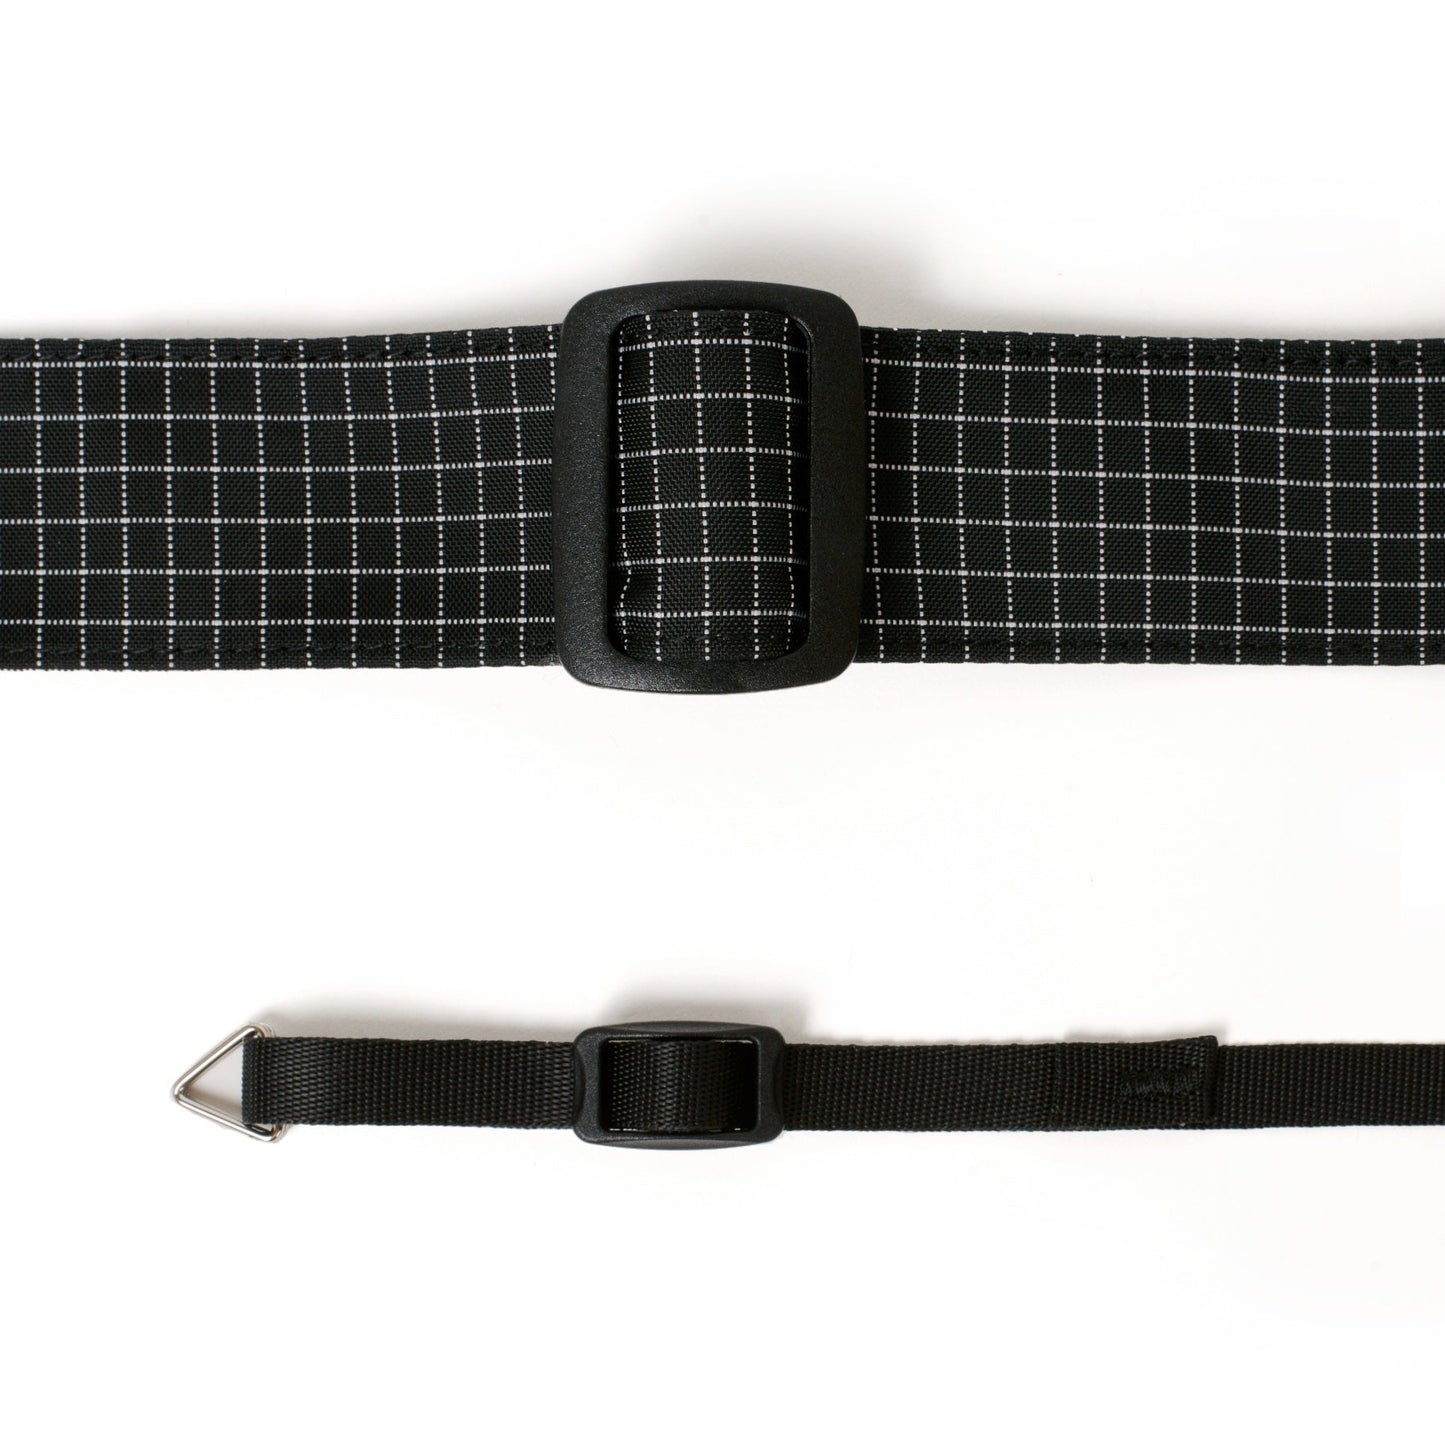 Adjustable Camera Neck Strap - The Usual